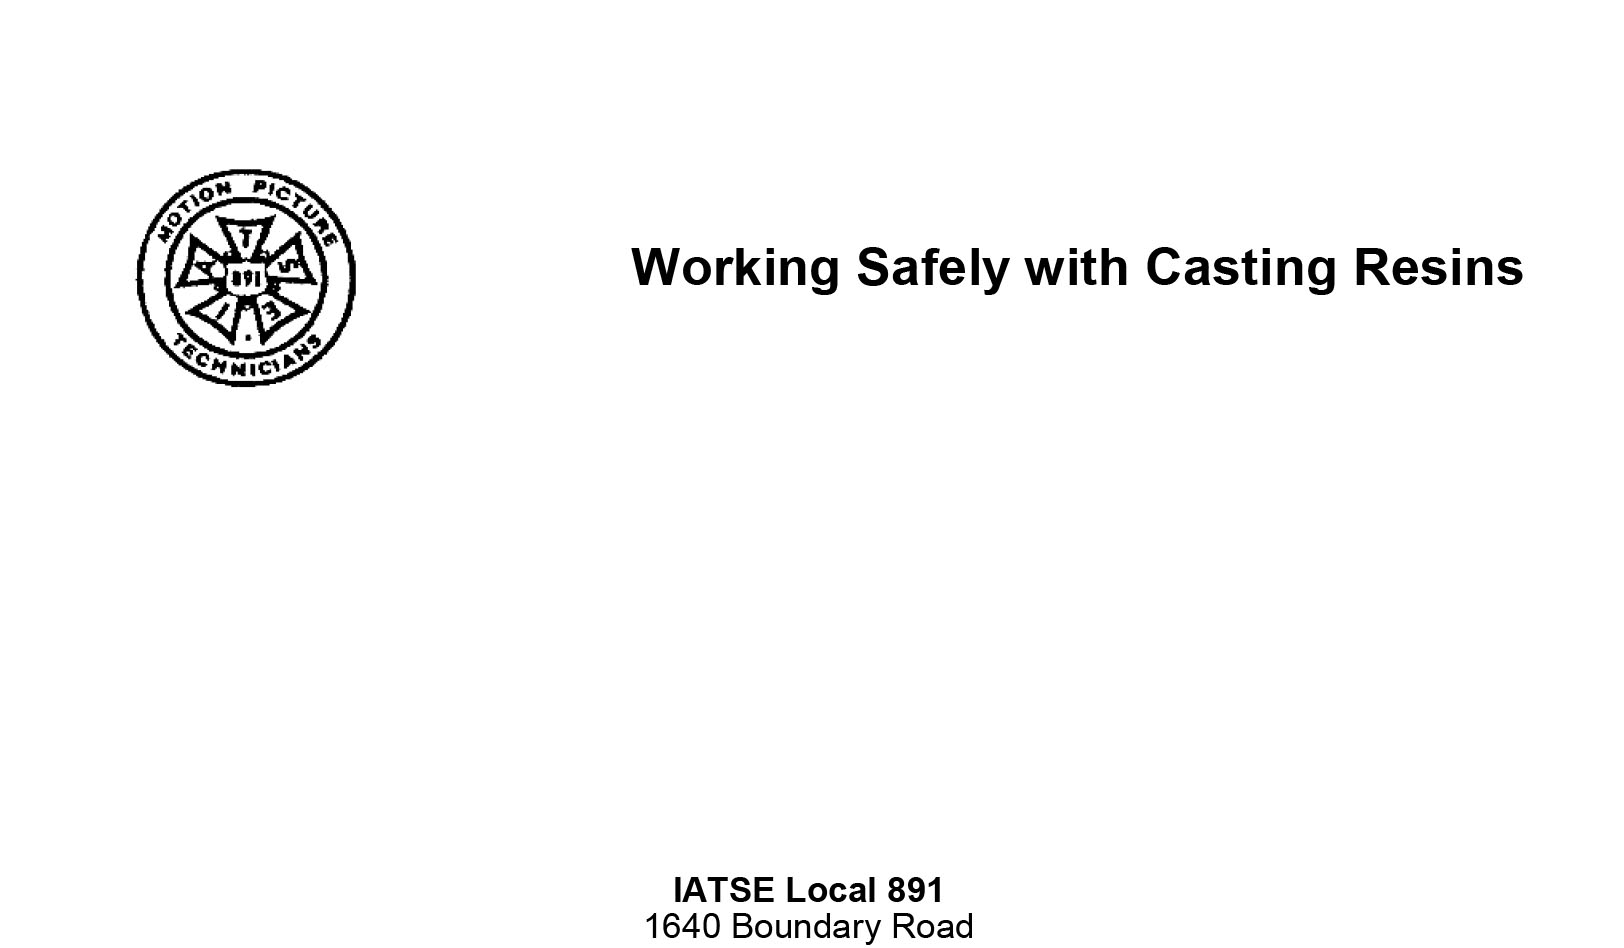 Working-Safely-with-Casting-Resins-Guidelines-PDF